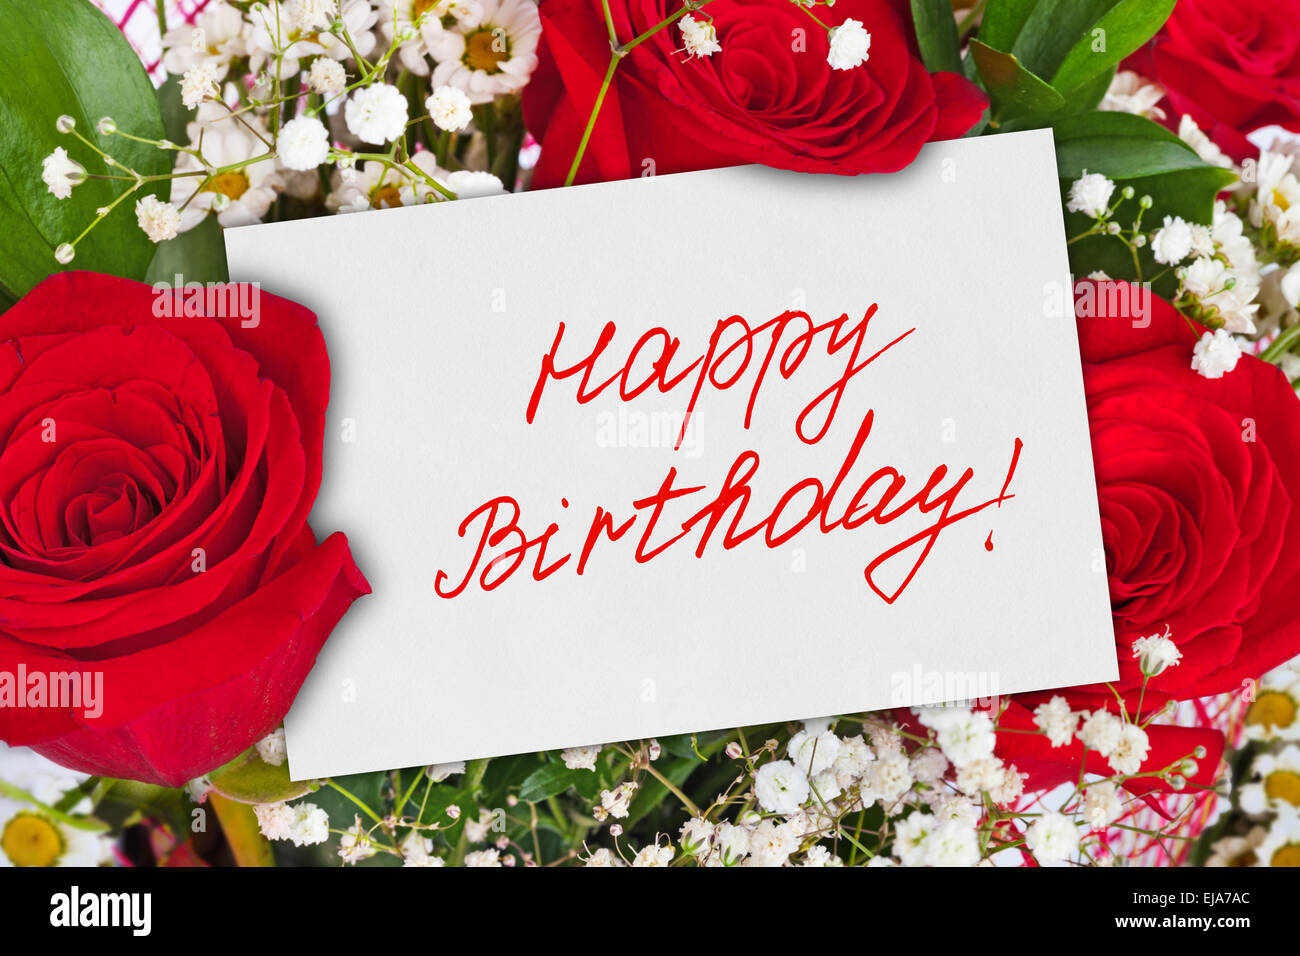 Roses Bouquet And Card Happy Birthday Stock Photo 80130580 Alamy